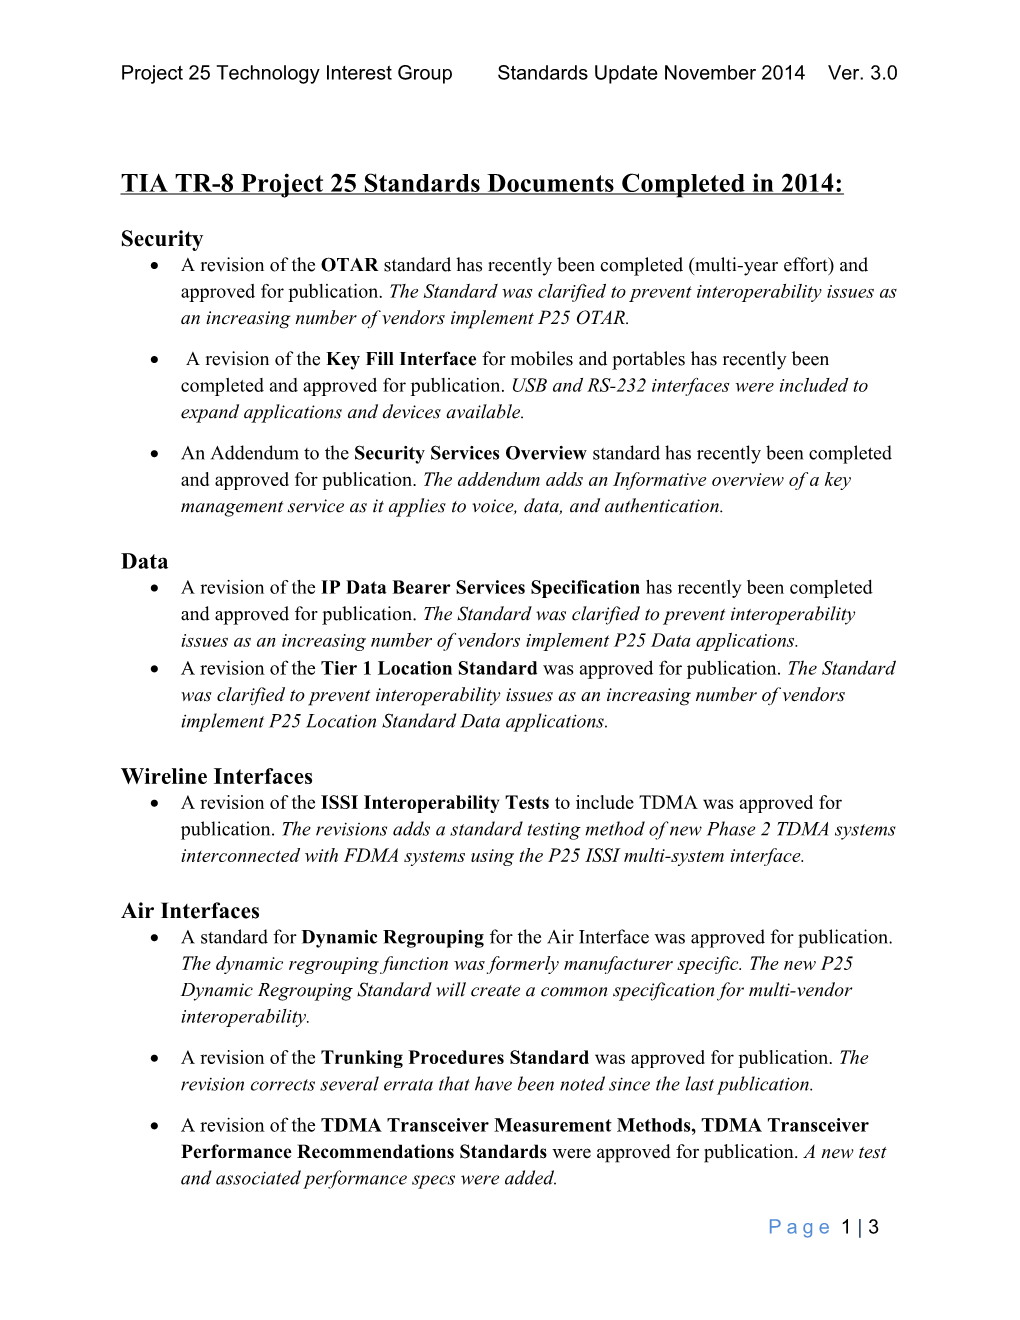 TIA TR-8 Project 25 Standards Documents Completed in 2014